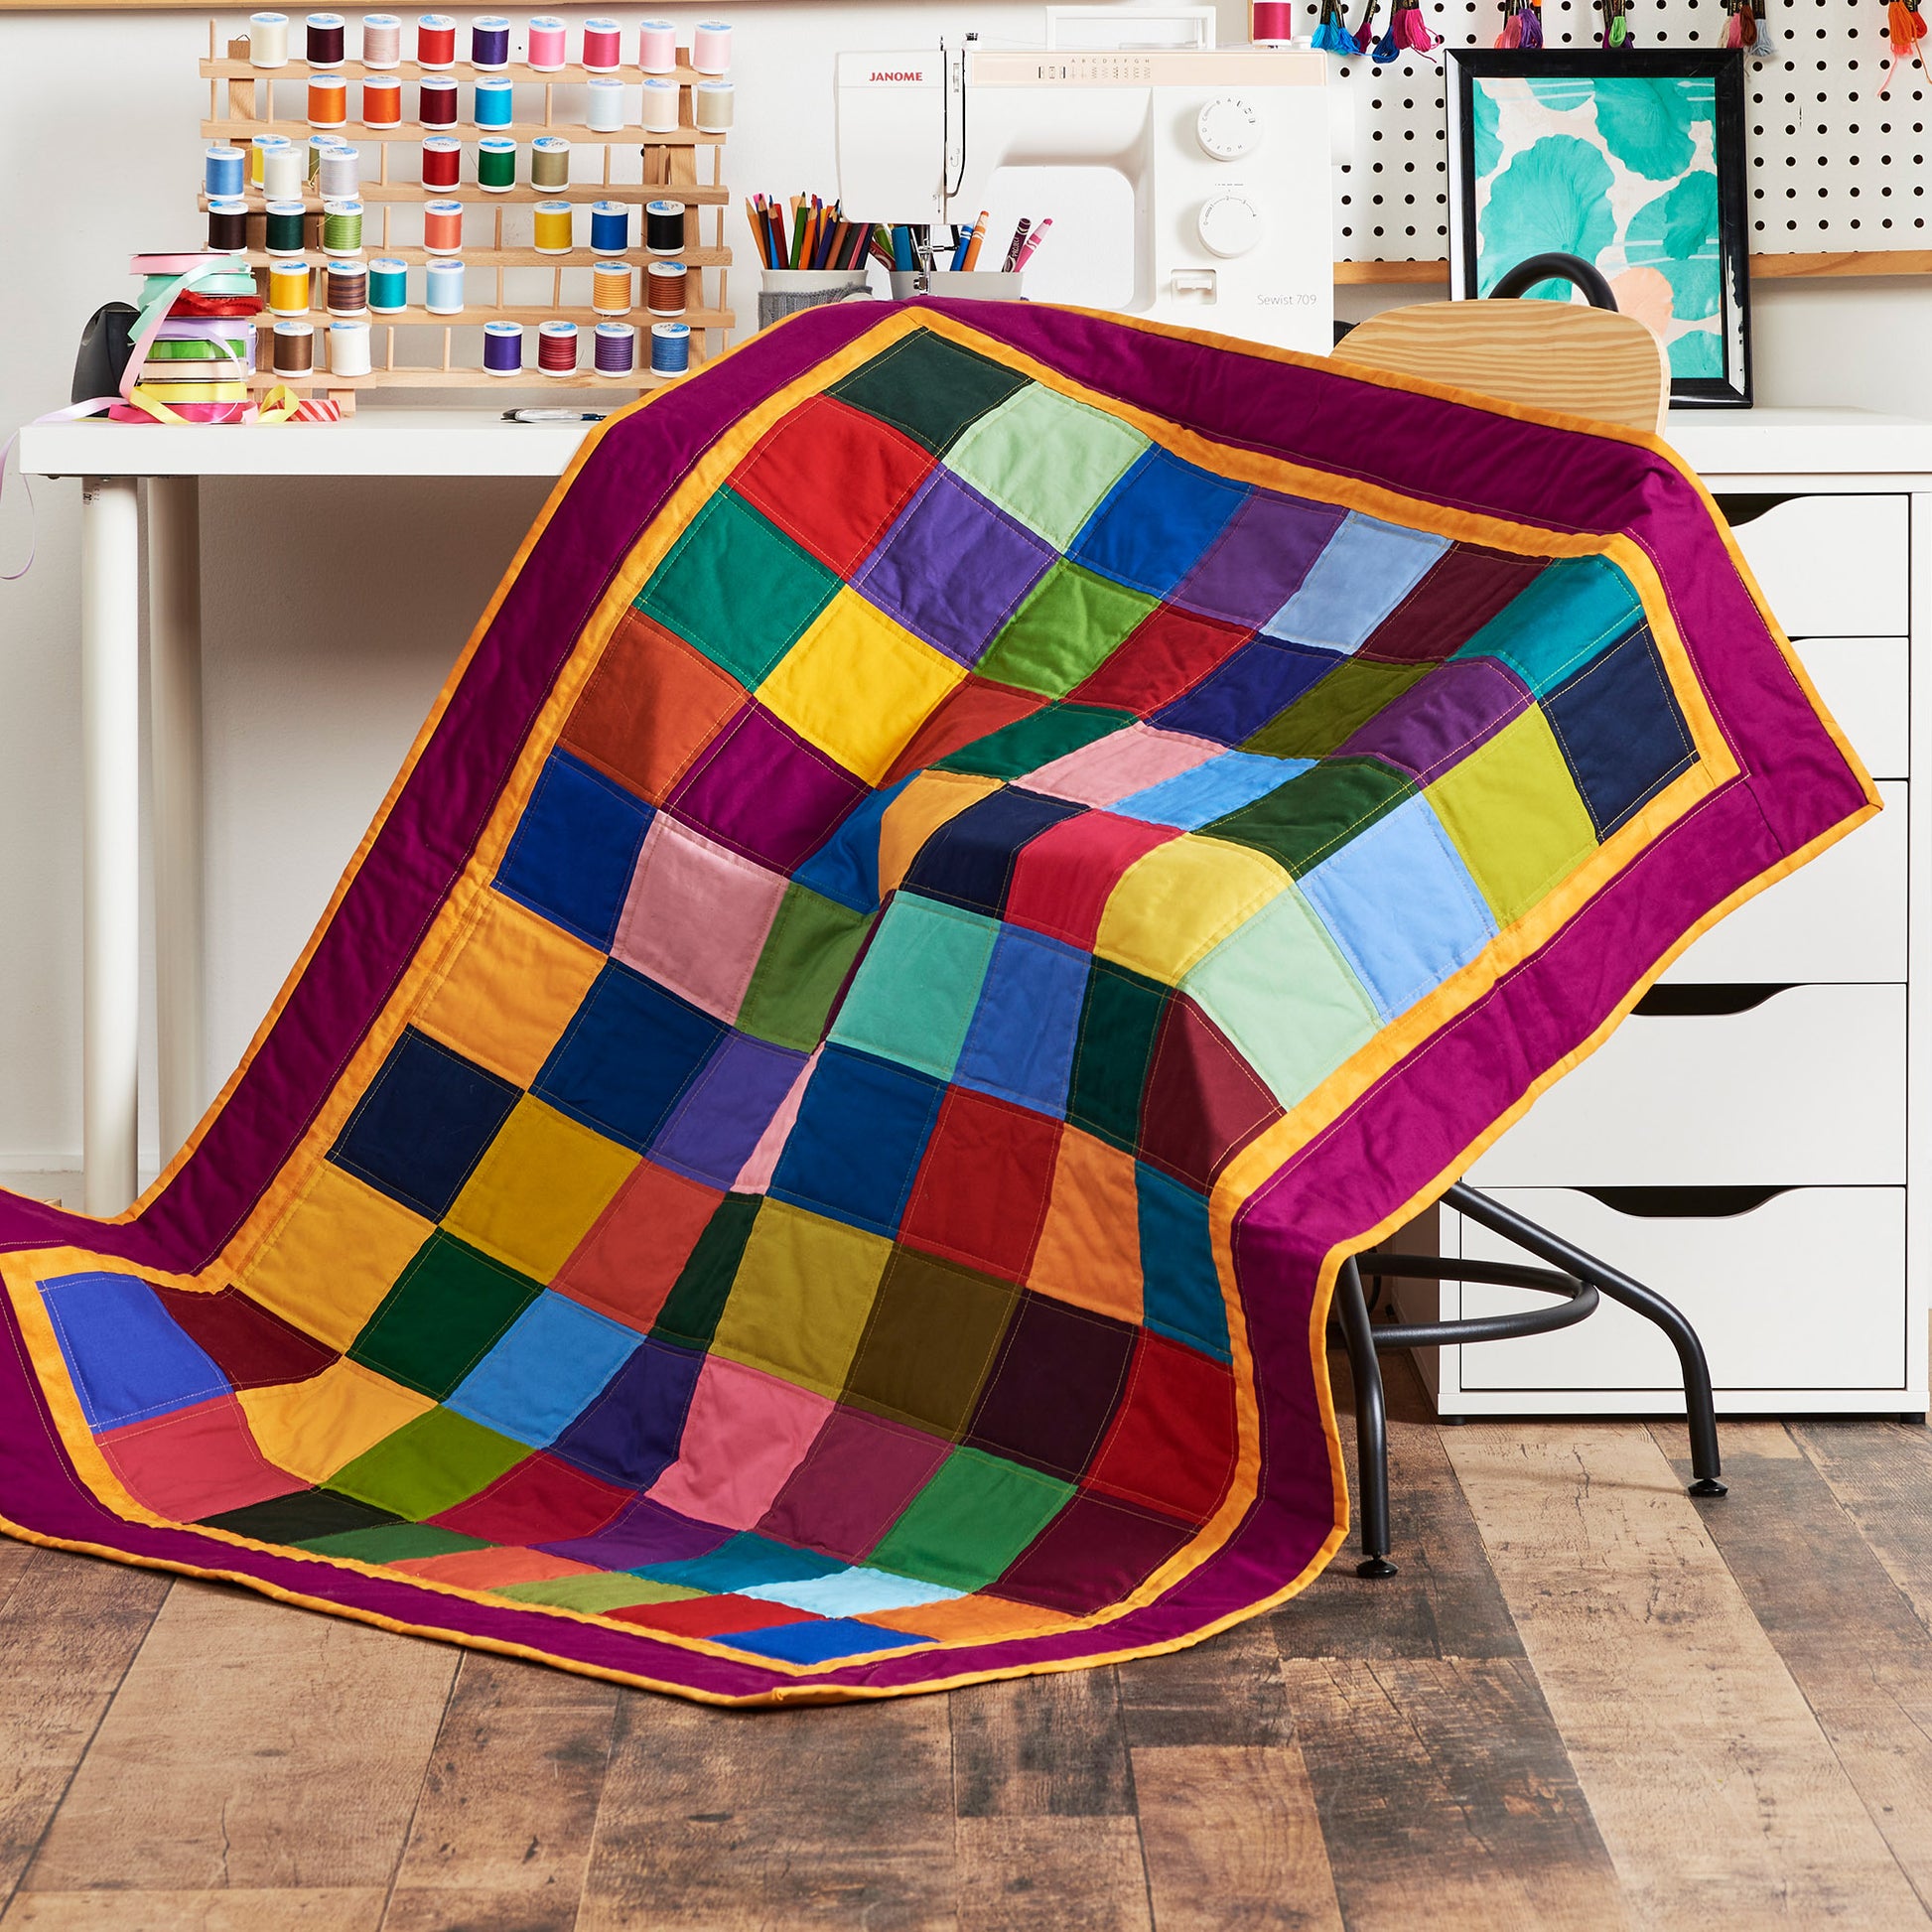 Free Coats & Clark Basic Square Quilt  Quilting Pattern